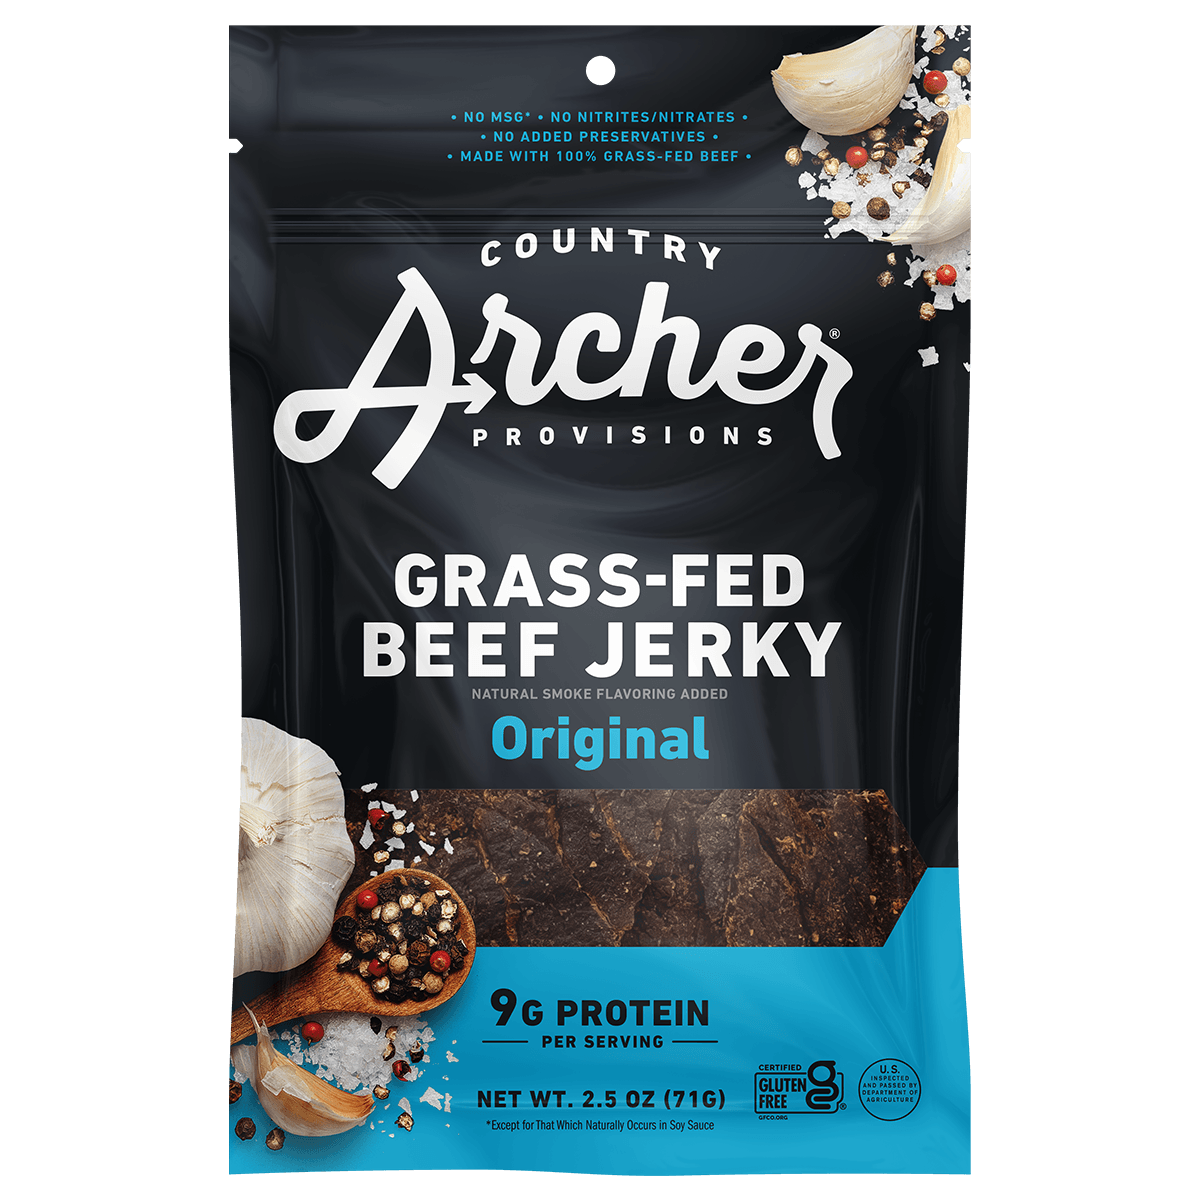 Jerky　Jerky　–　Archer　Beef　100%　Country　Grass-Fed　Provisions